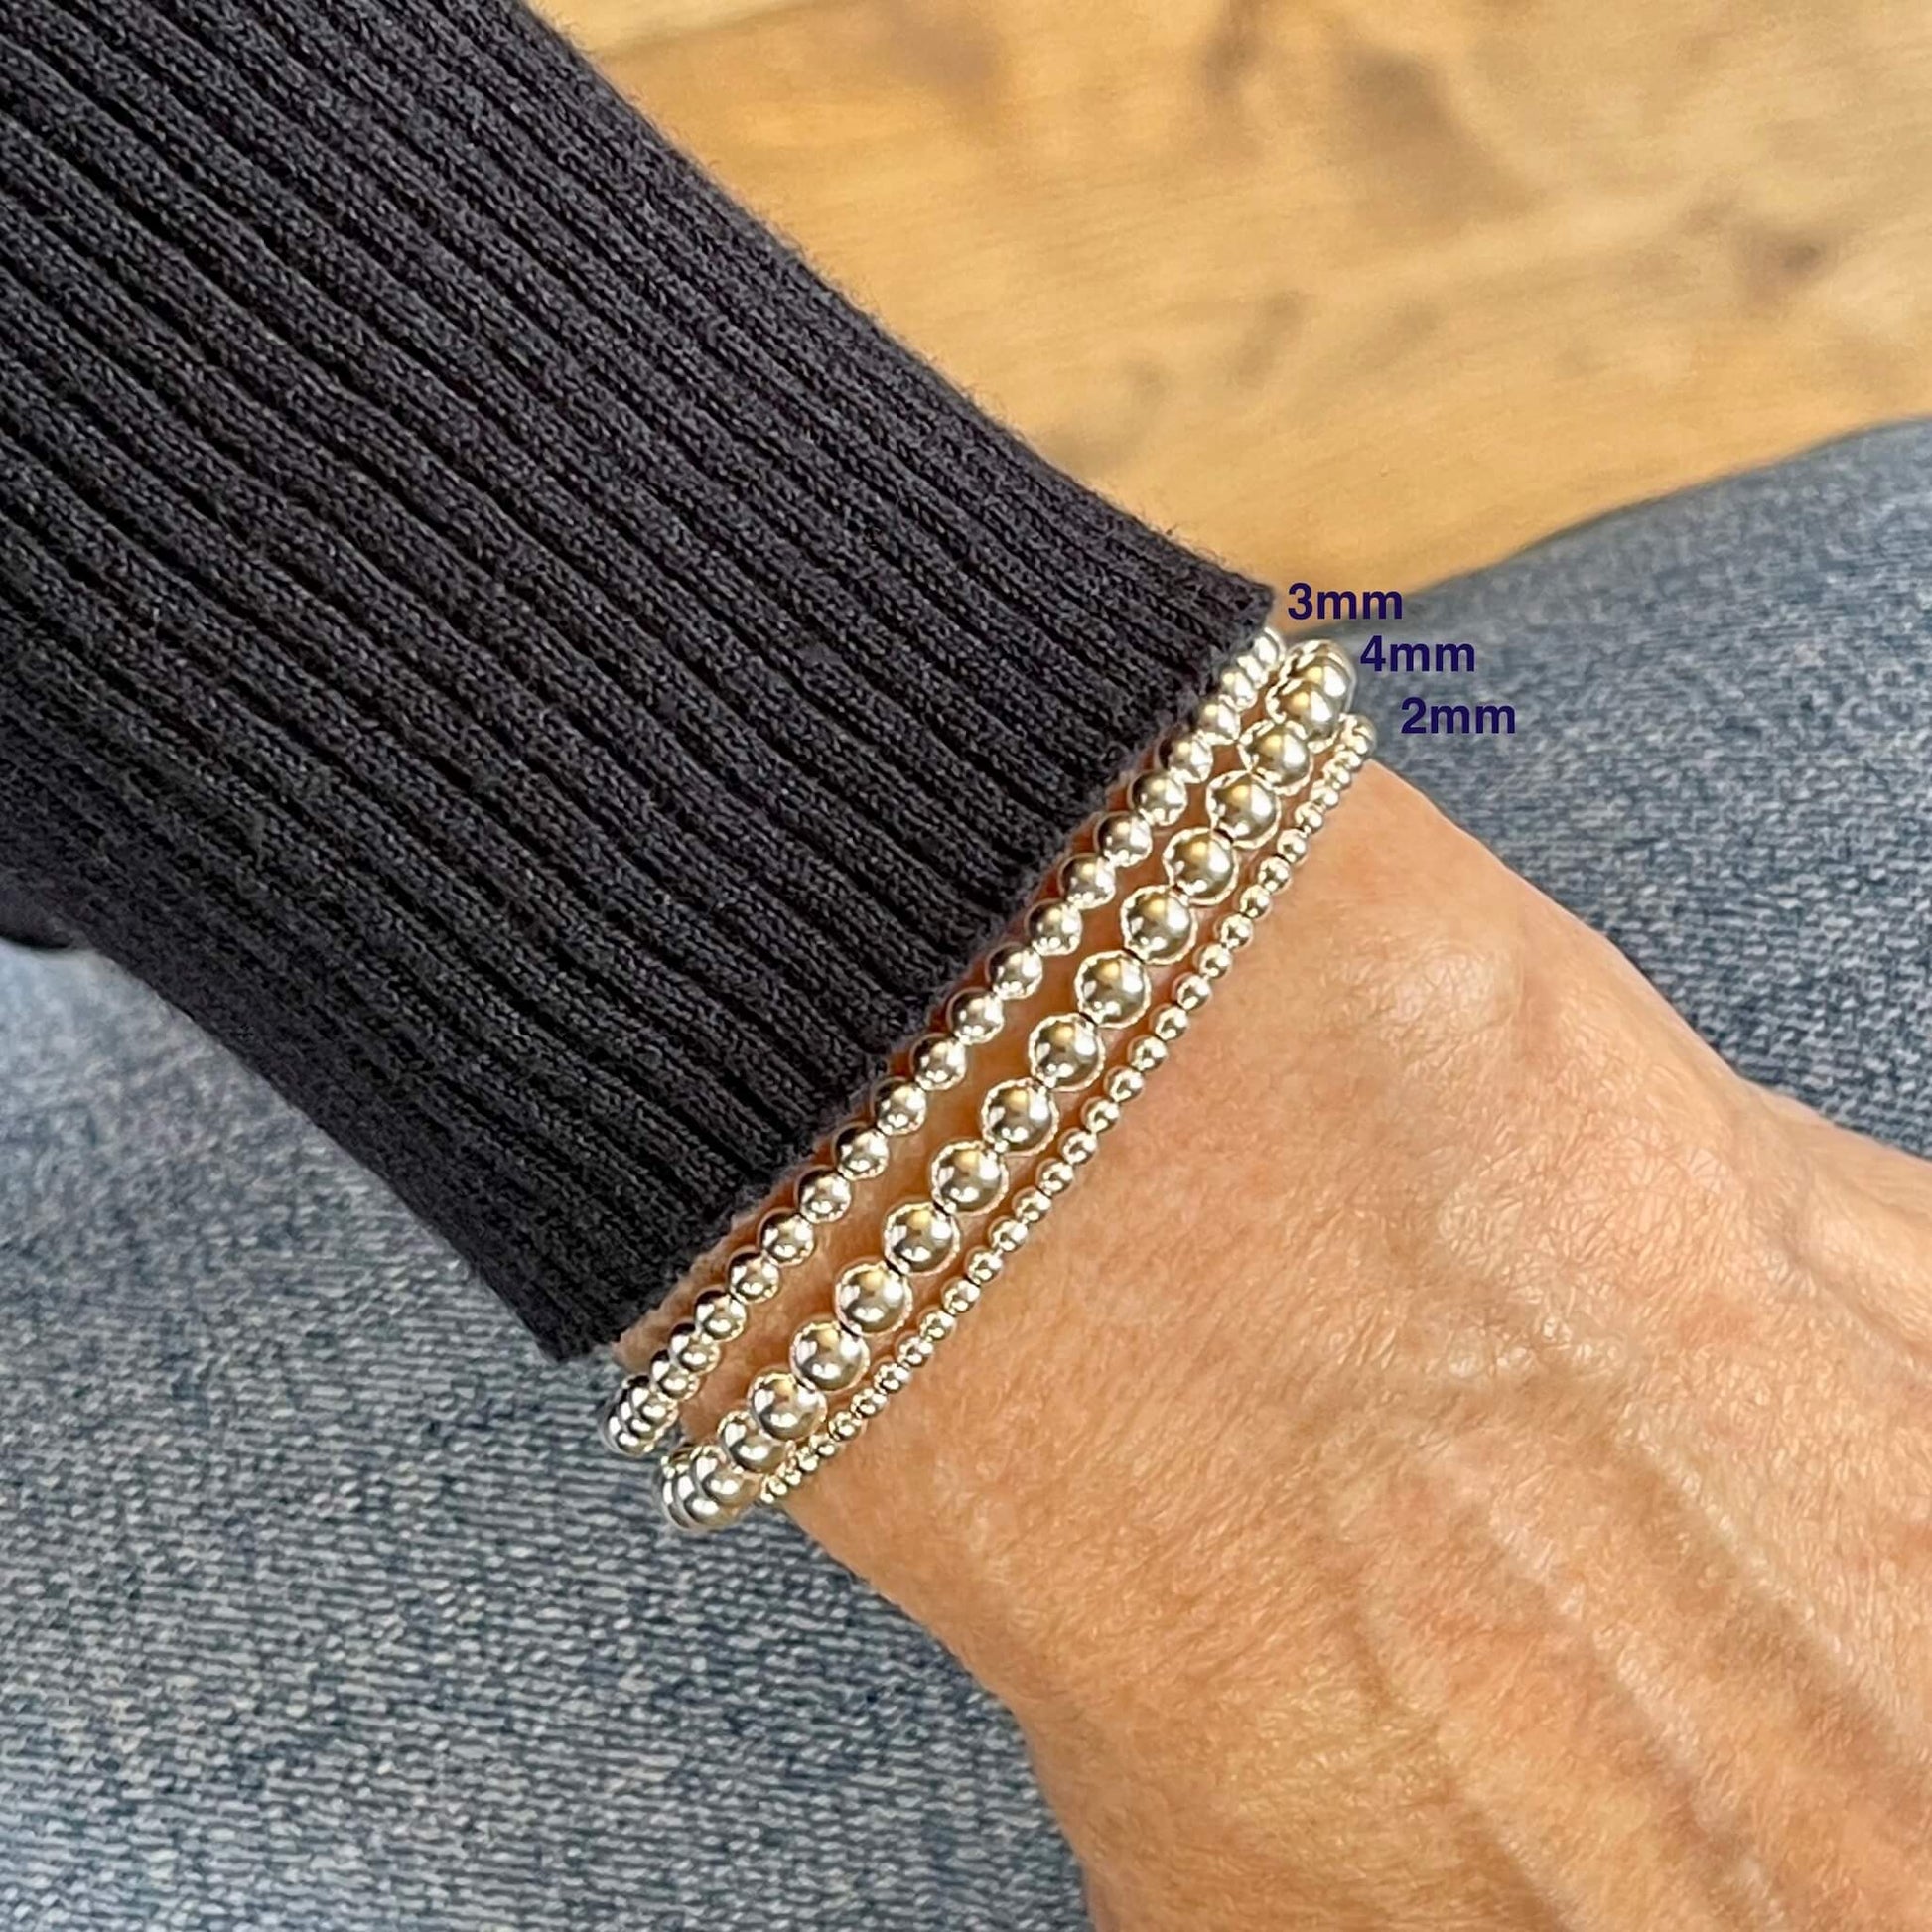 Silver bead bracelets with sterling silver beads. These stylish silver stretch bracelets are waterproof and tarnish resistant.